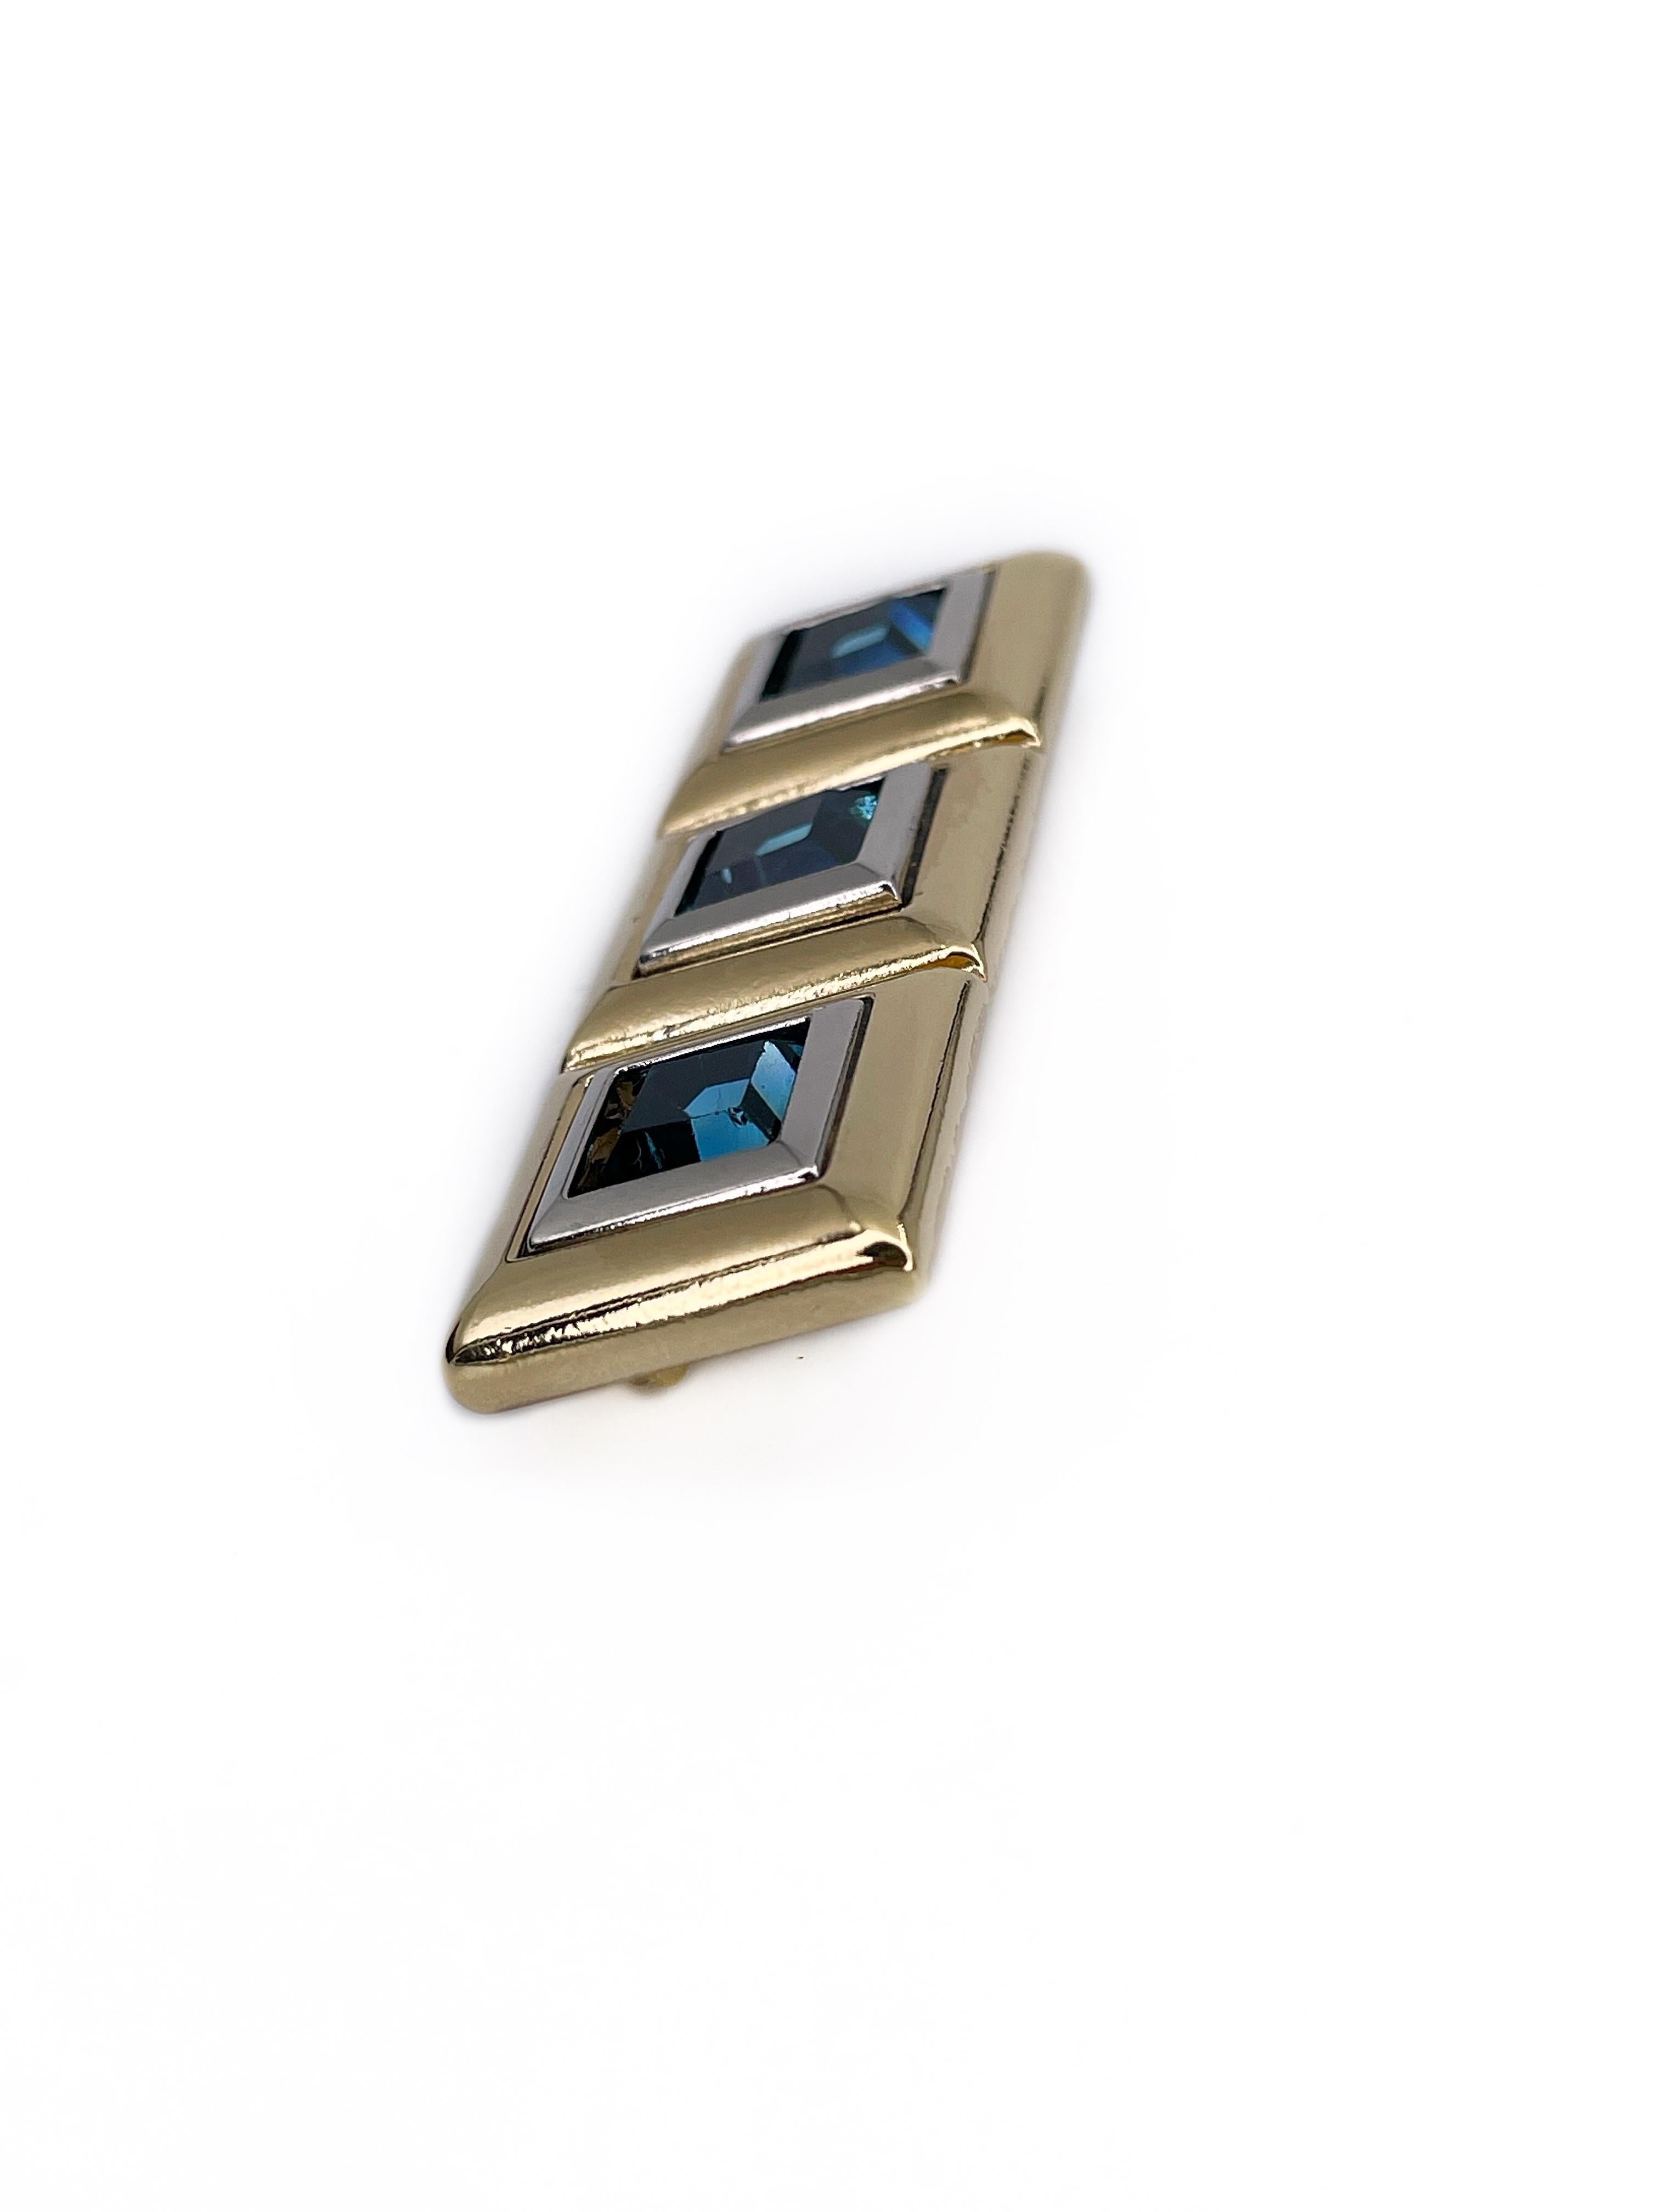 This is a vintage bar brooch designed by YSL in 1980s. The piece is gold and silver plated, adorned with light blue square rhinestones.

Markings: “YSL - Made in France” (shown in photos).

Size: 6x2cm

———

If you have any questions, please feel